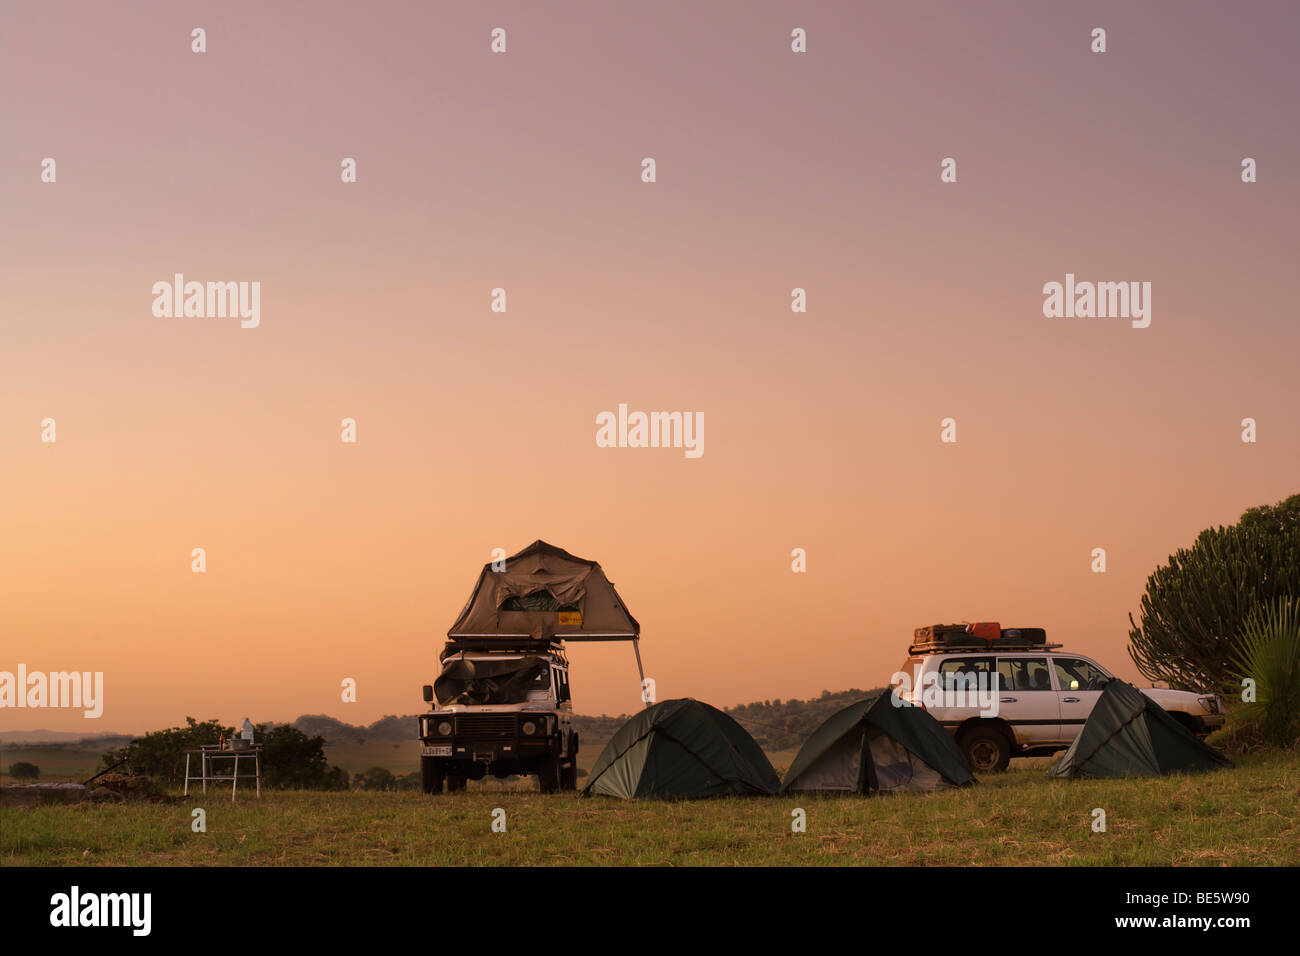 Tents and vehicles at a campsite in Kidepo Valley National Park in northern Uganda. Stock Photo